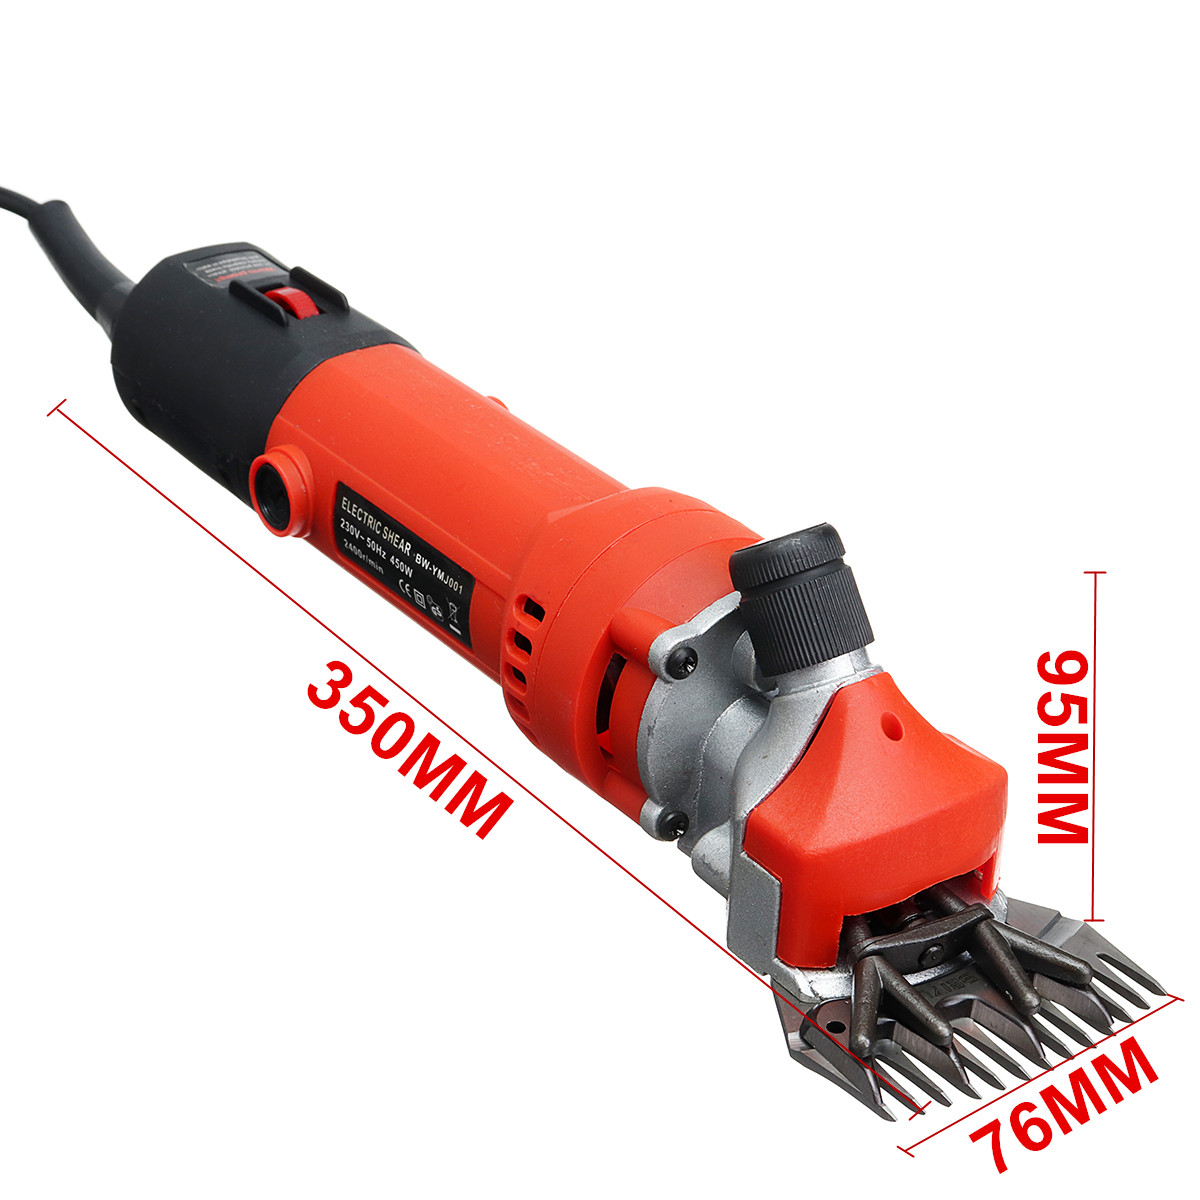 600W-220V-Electric-Sheep-Shearing-Machine-Goat-Hair-Trimmer-Clippers-Power-Tools-1347454-9